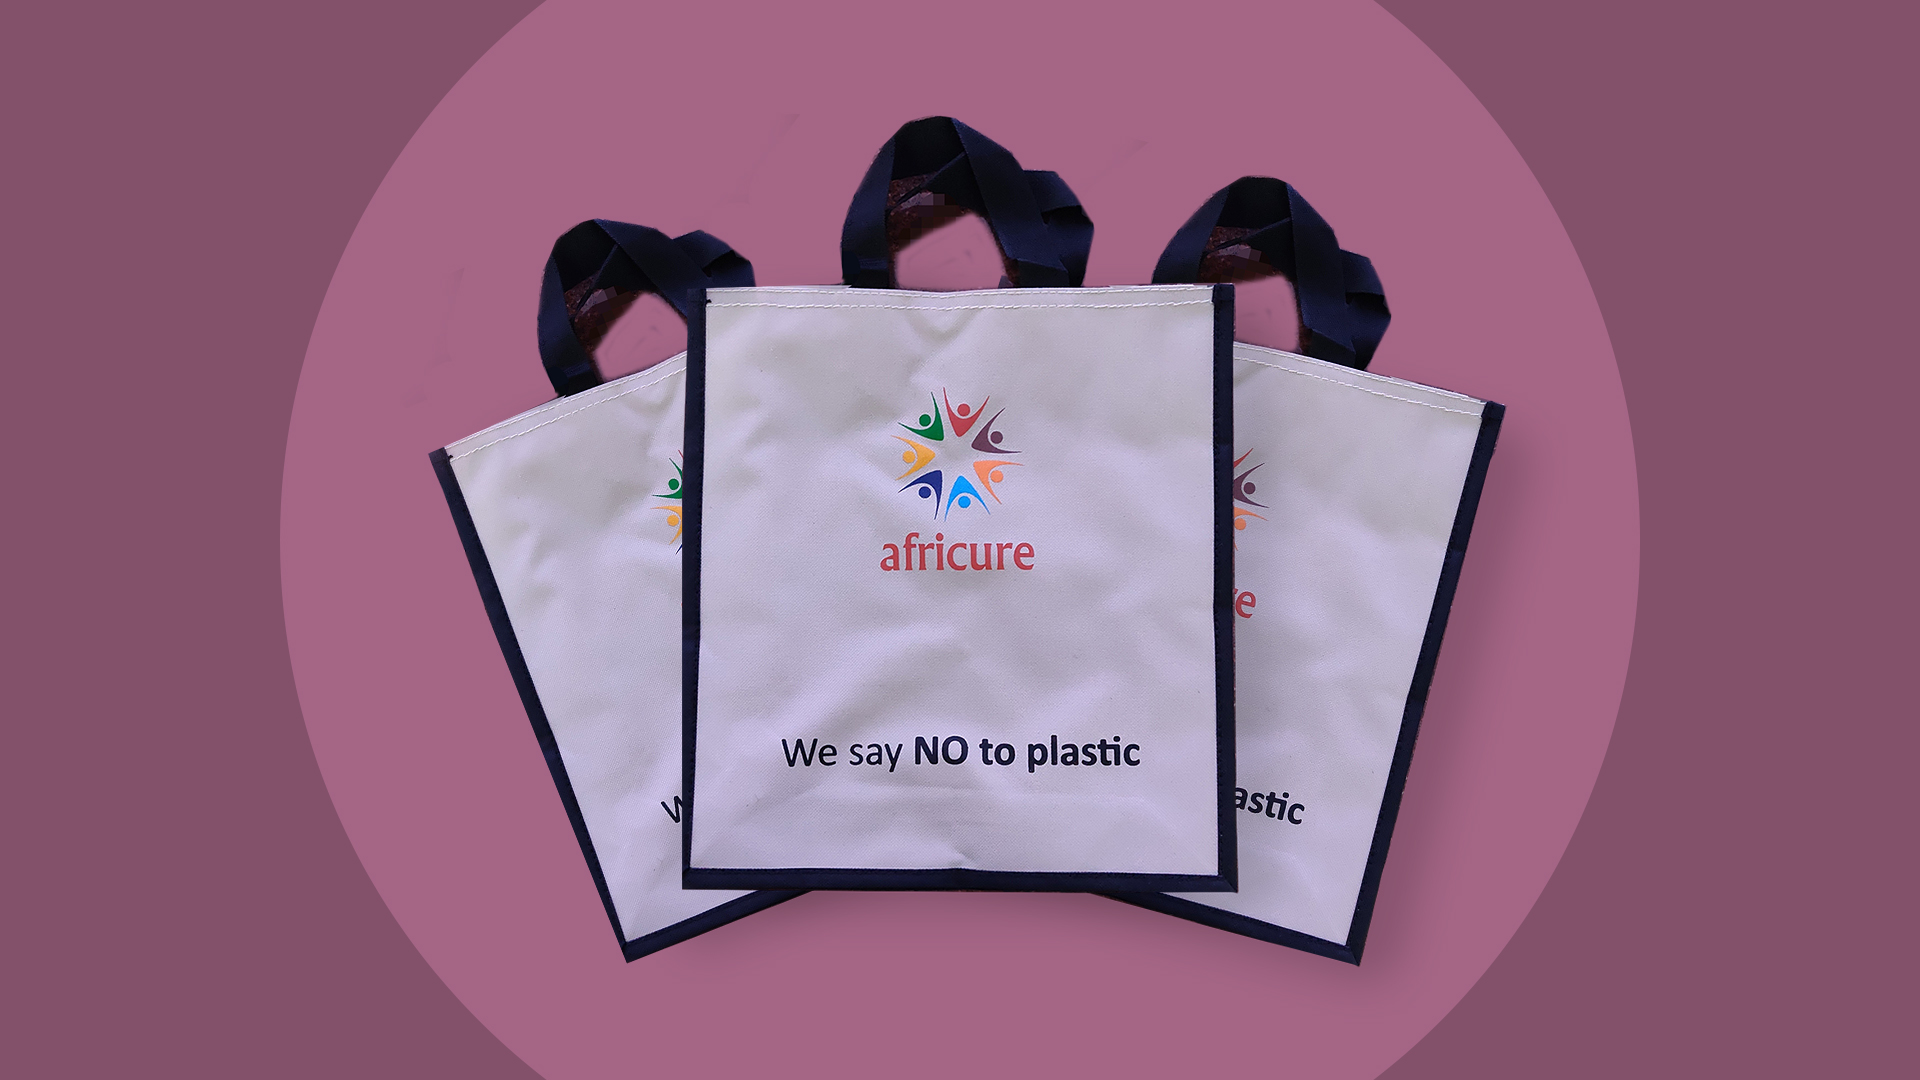 Africure says NO to PLASTIC